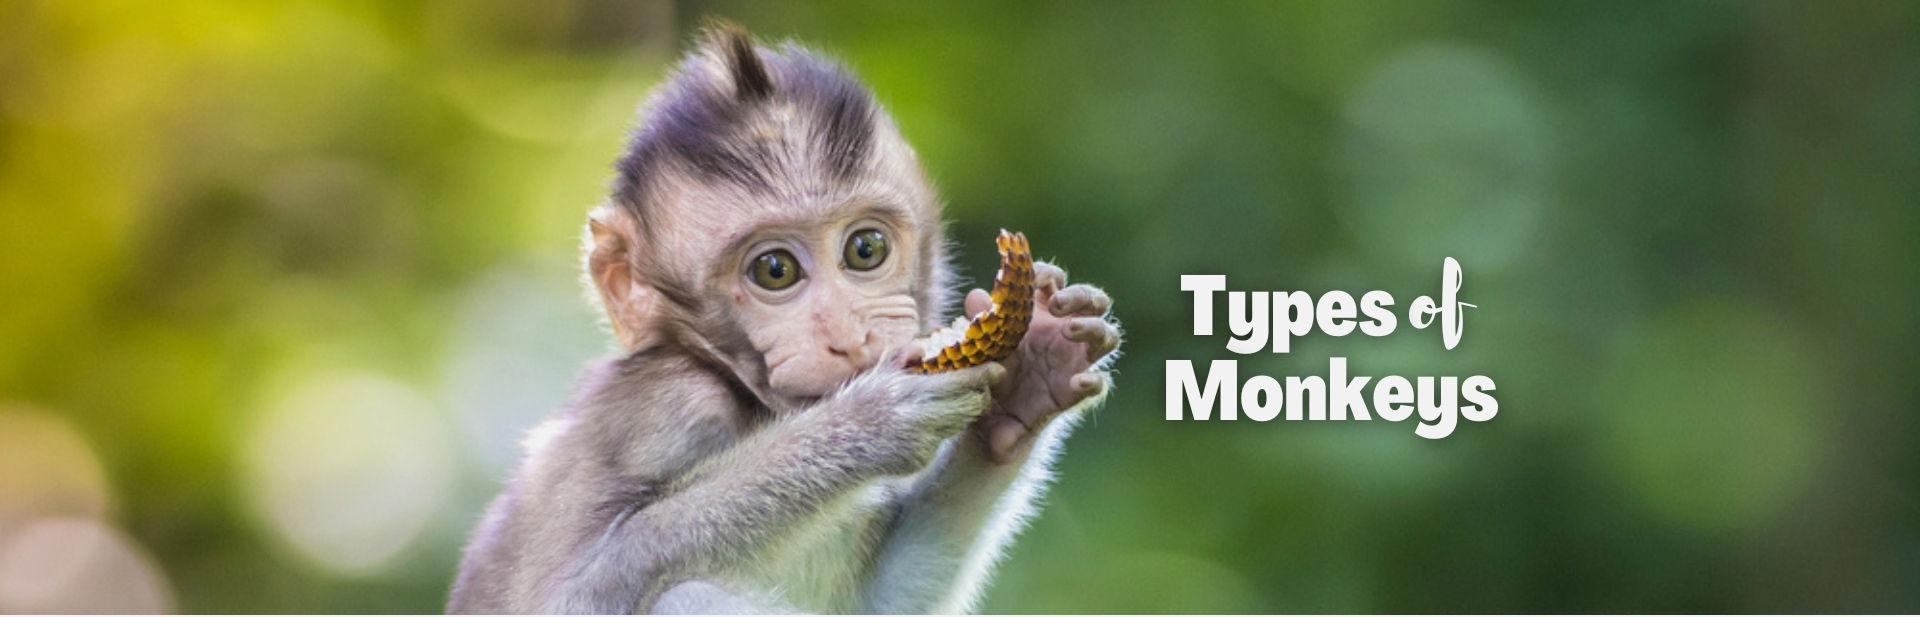 25 Remarkable Types of Monkeys: An Exploration Through The Wild